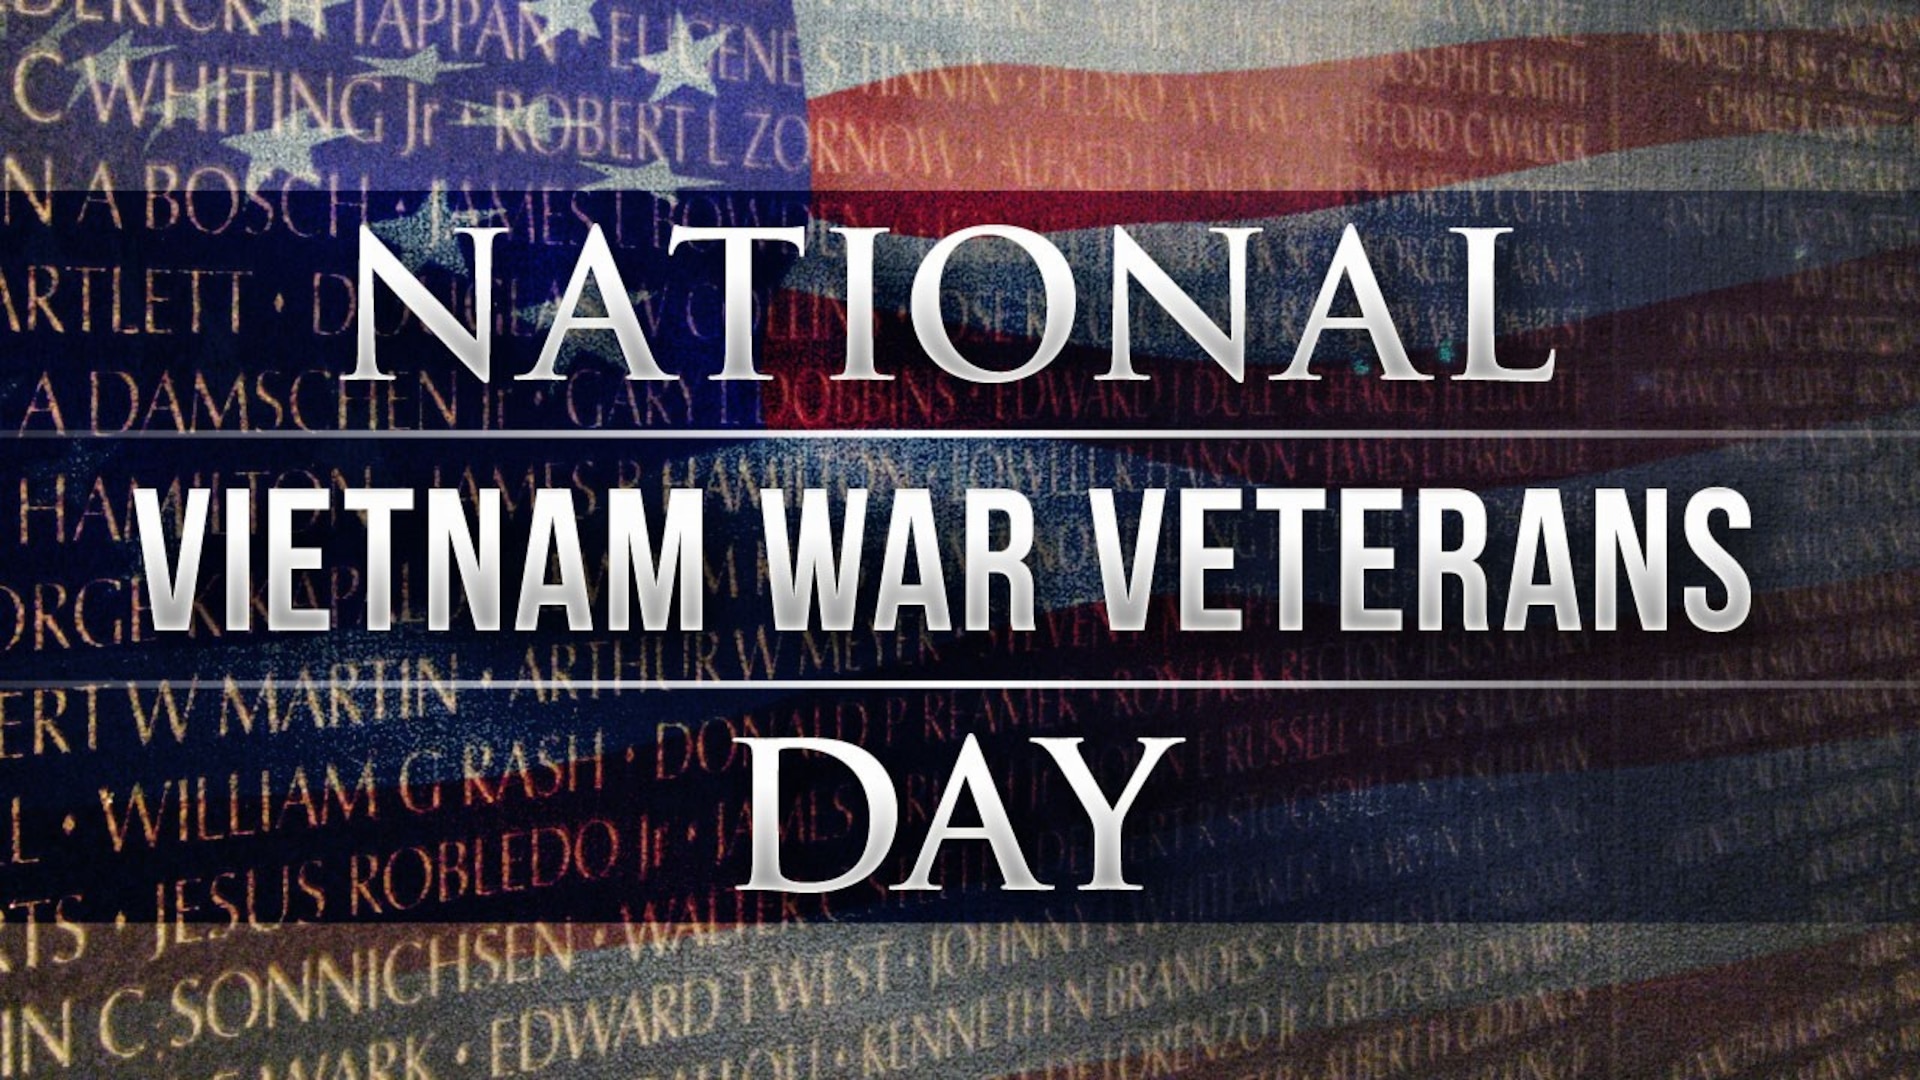 Vietnam War Veterans Day a day to pay tribute, honor those who served